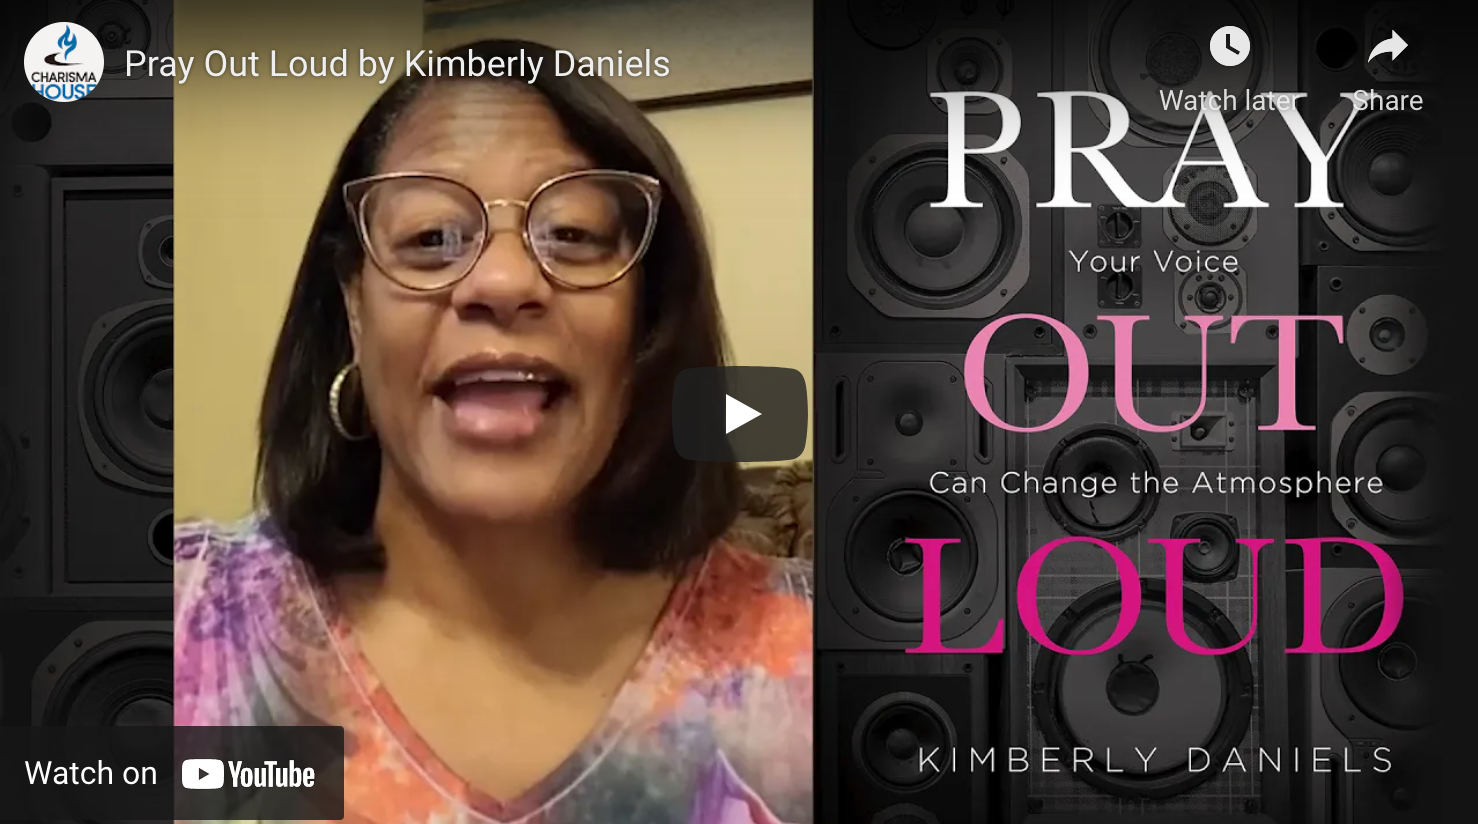 watch this message from Kimberly Daniels